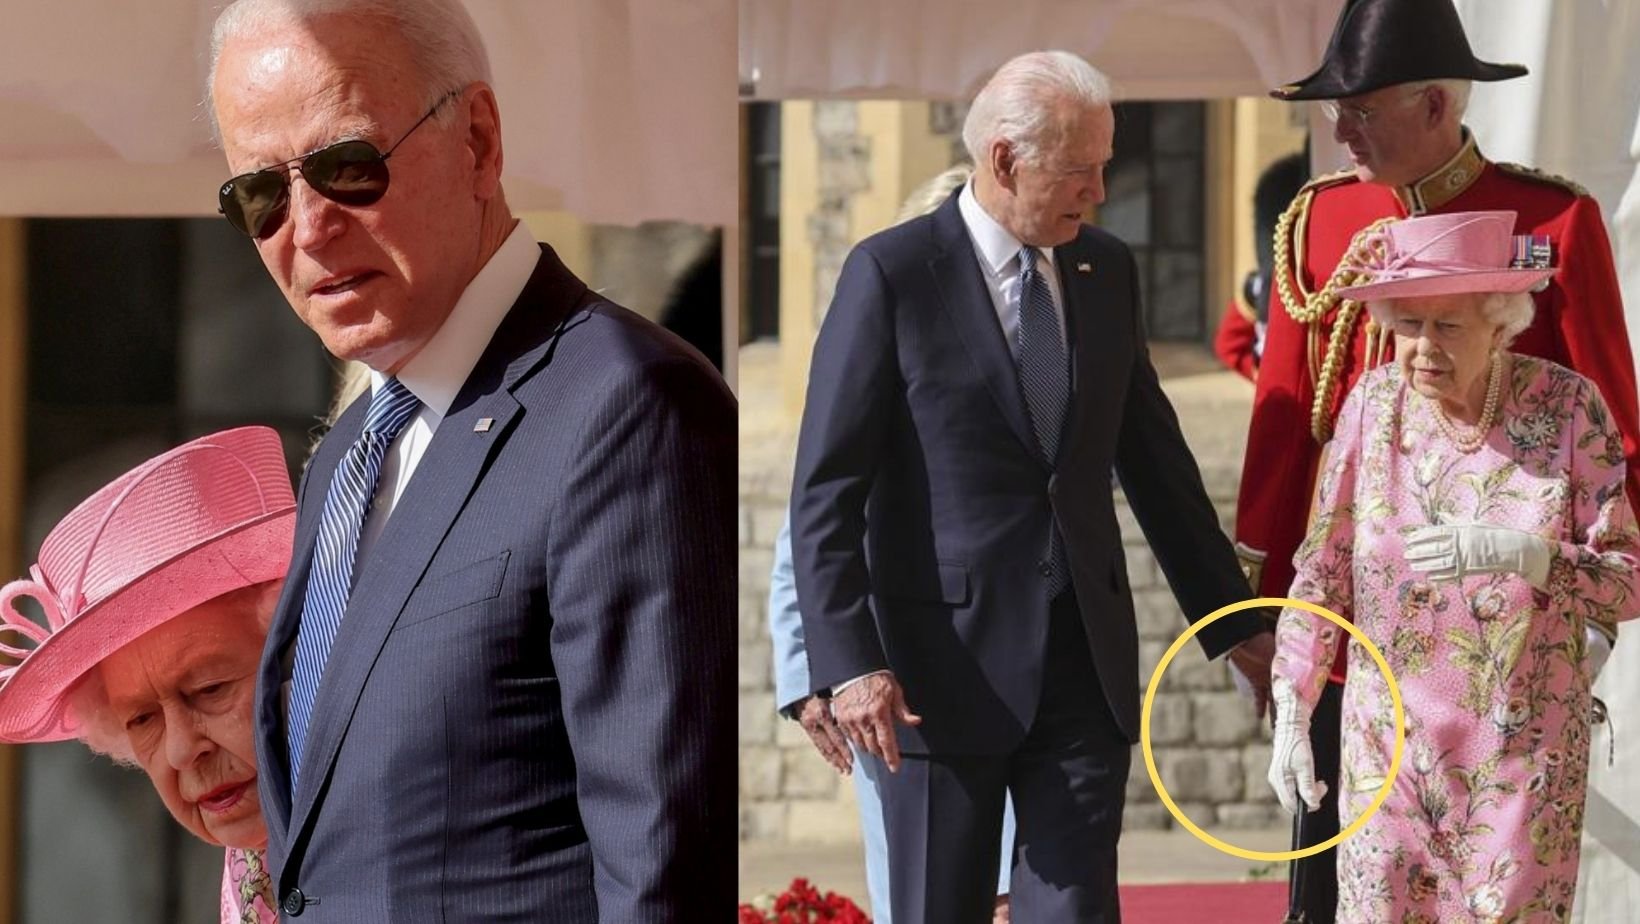 cover 10.jpg?resize=1200,630 - President Biden Violated Royal Protocols When He Met The Queen